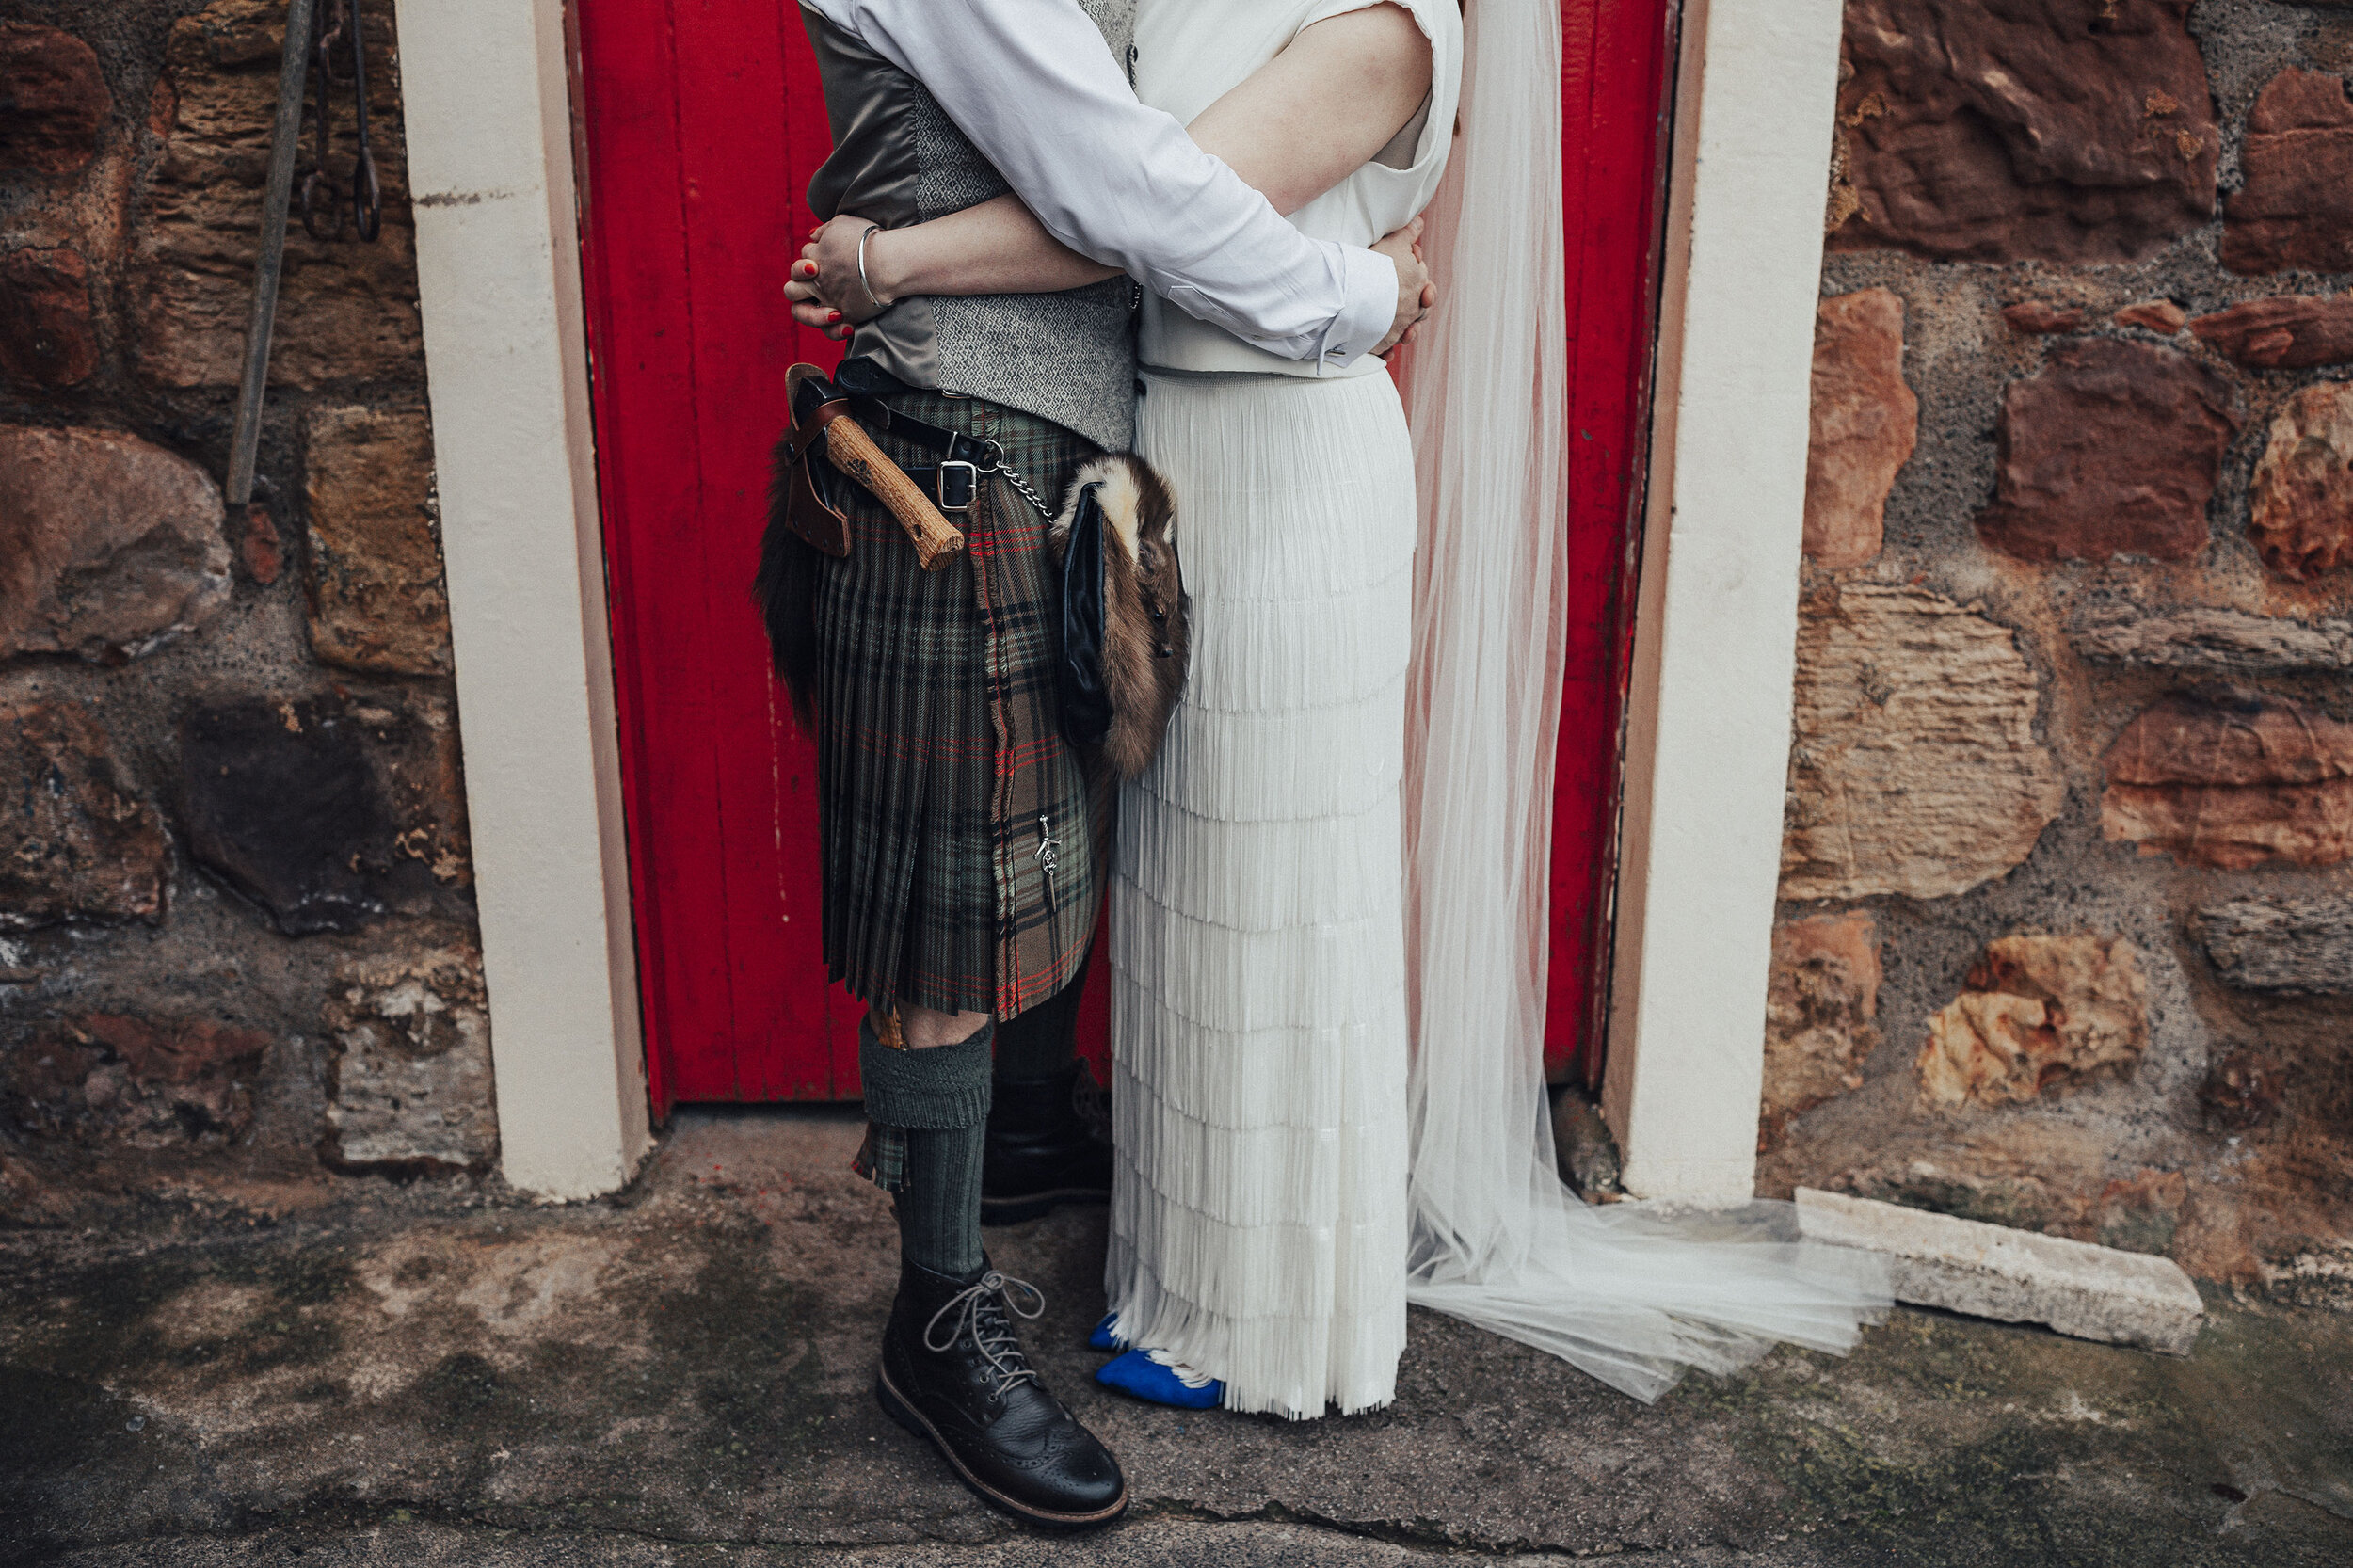 COW_SHED_CRAIL_WEDDING_PJ_PHILLIPS_PHOTOGRAPHY_52.jpg